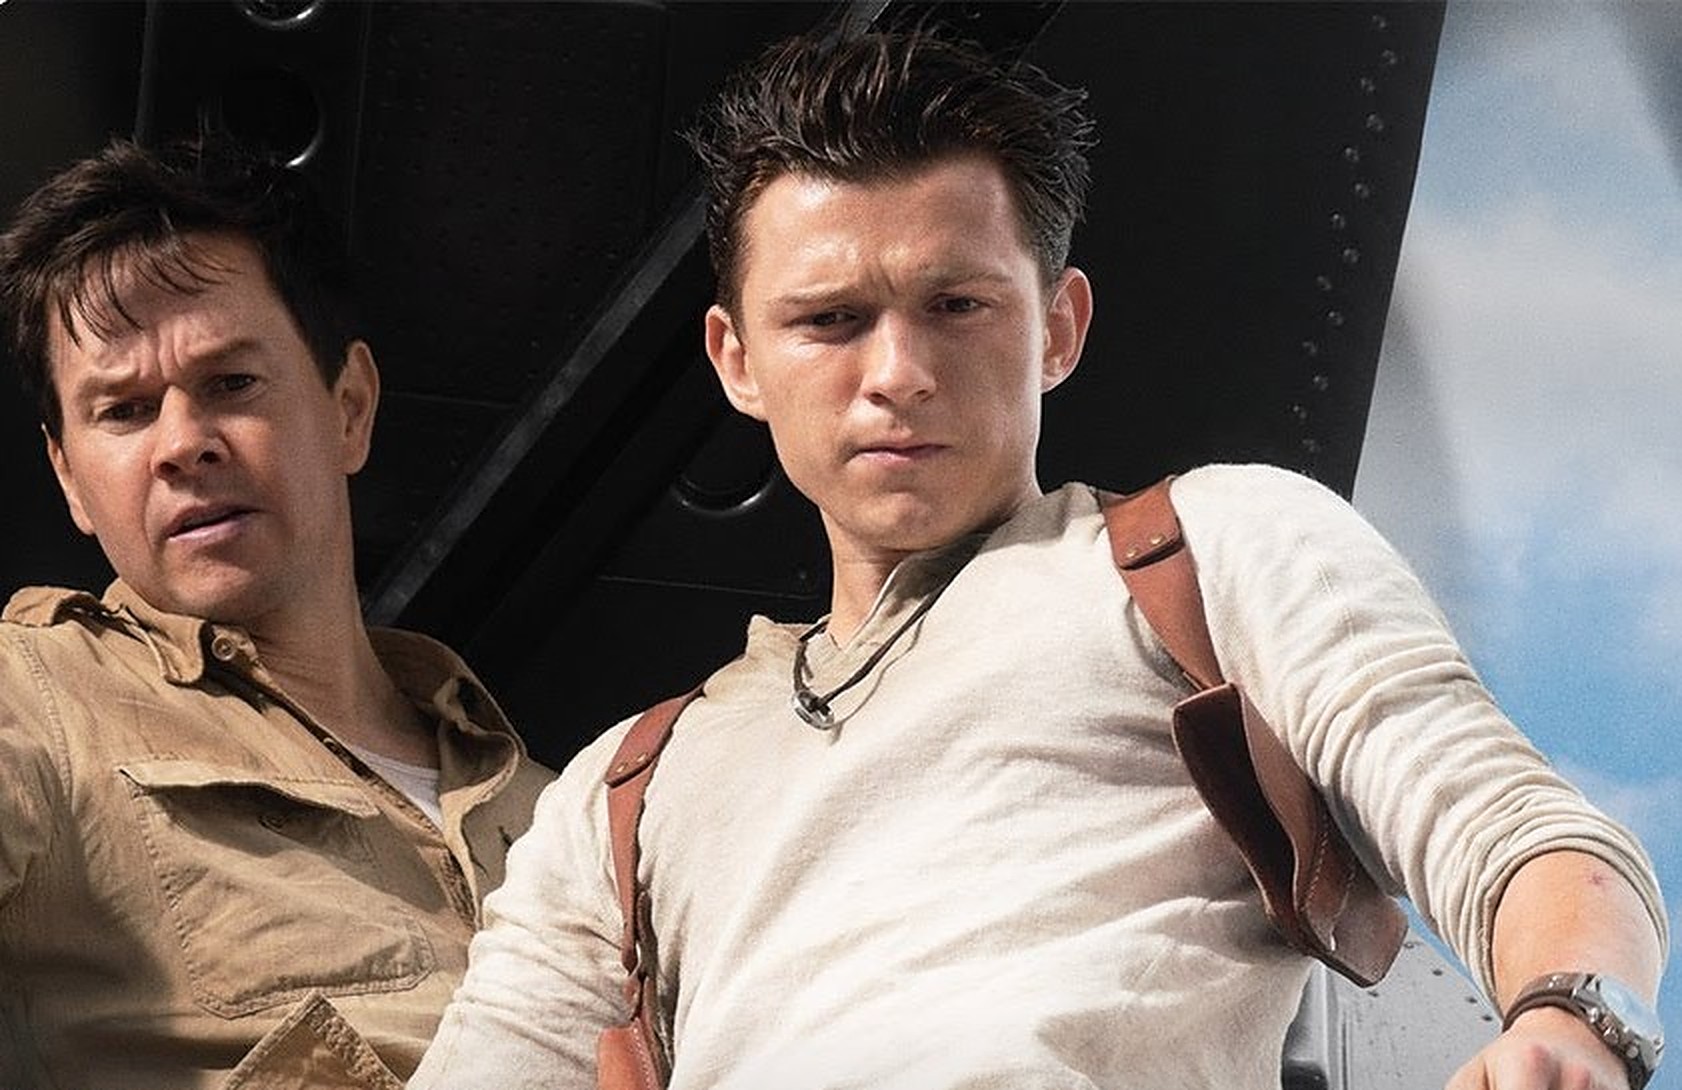 Nathan Drake (Tom Holland) Screen Accurate Uncharted Costume Guide